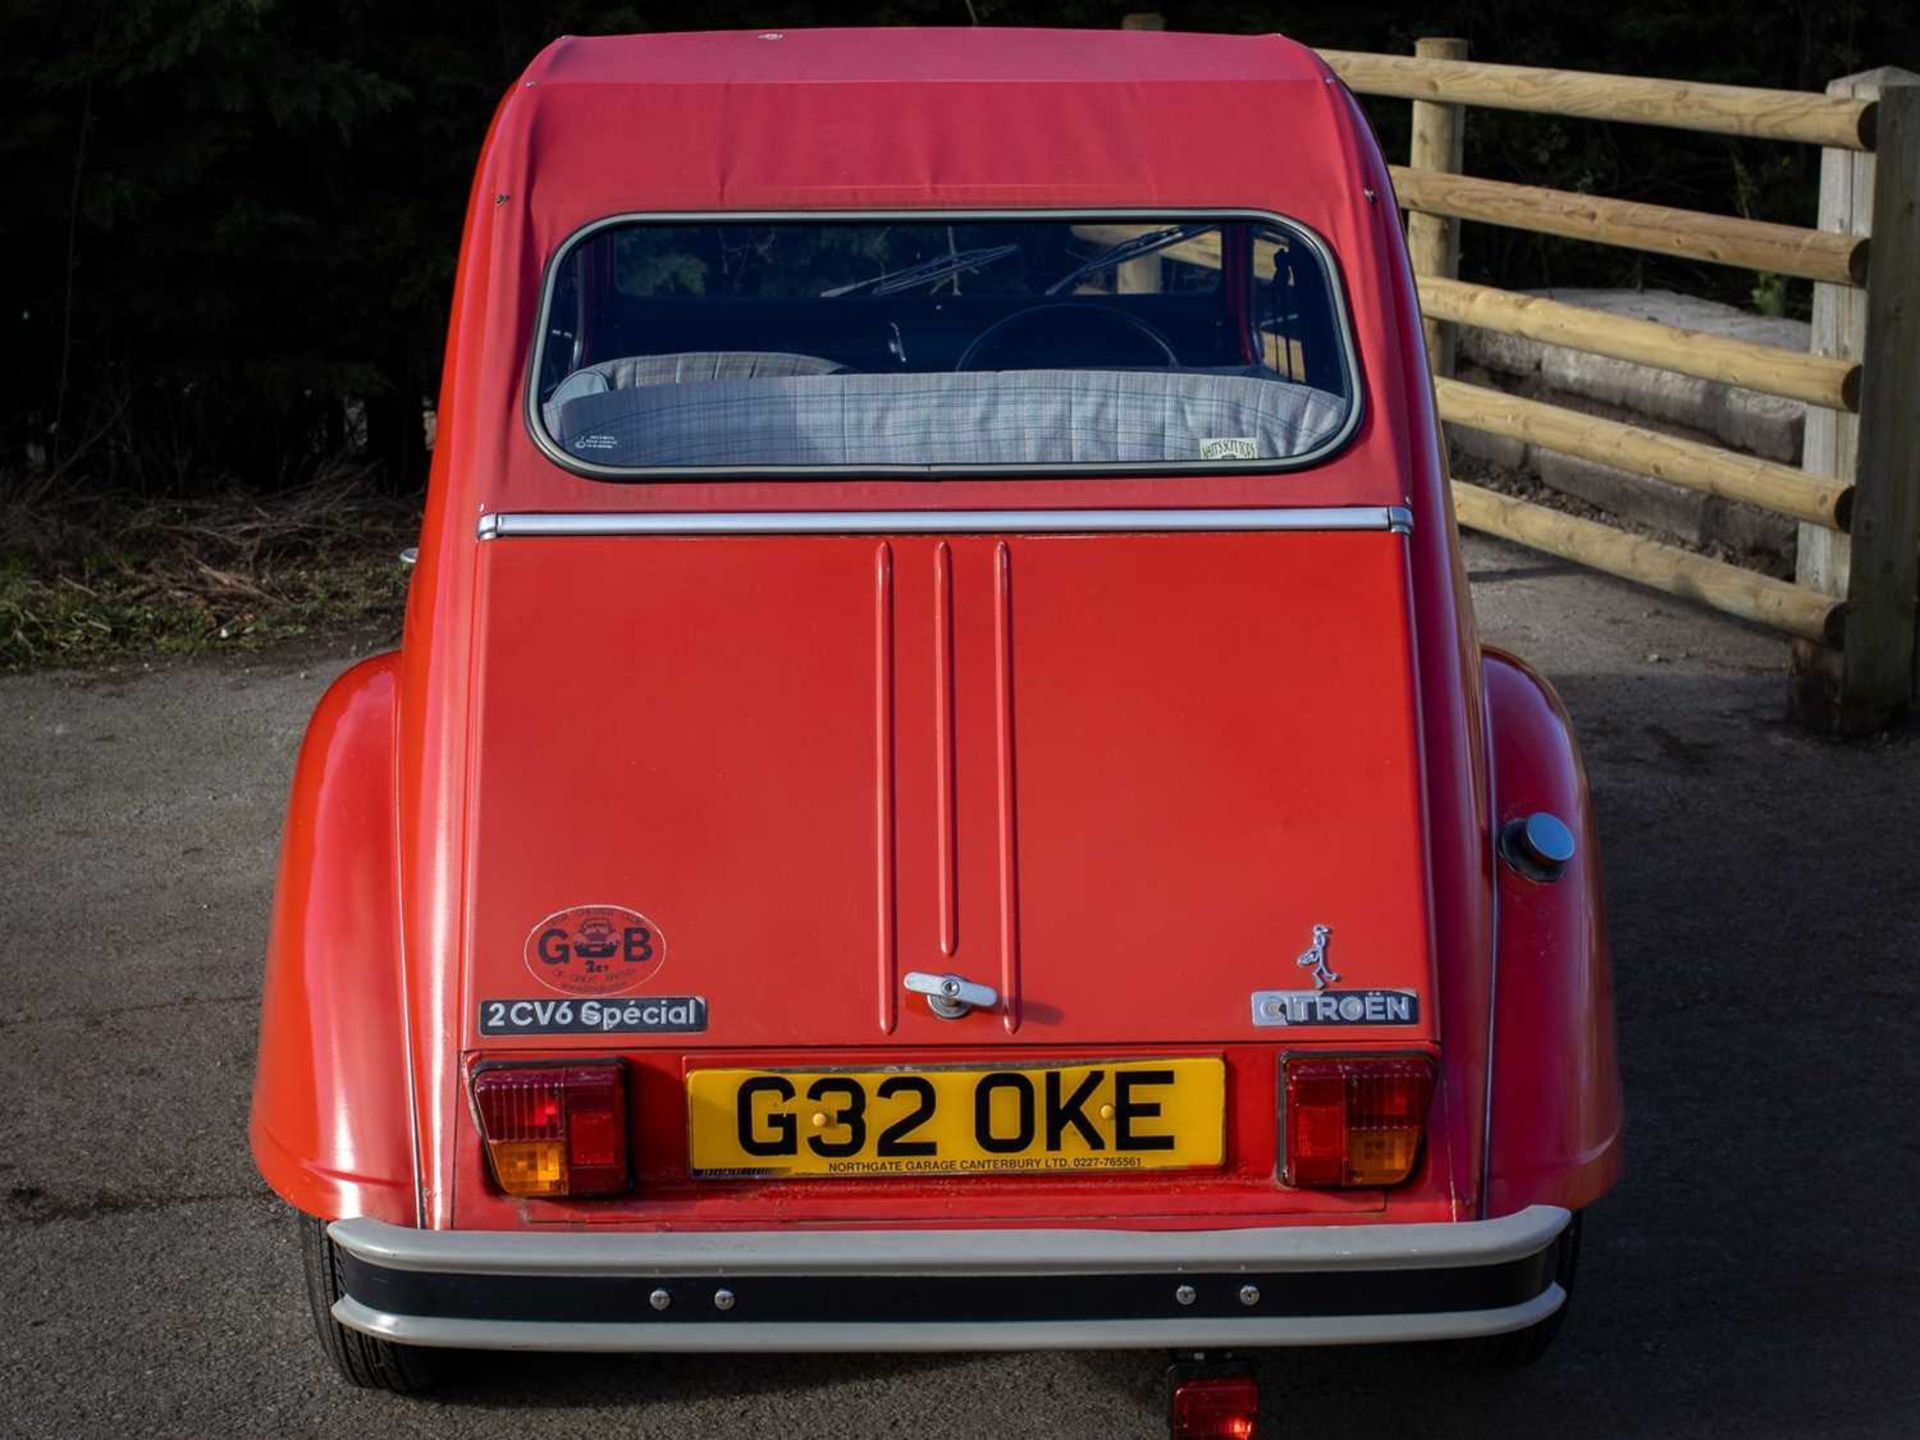 1989 Citroën 2CV6 Spécial Believed to have covered a credible 15,000 miles - Image 19 of 113